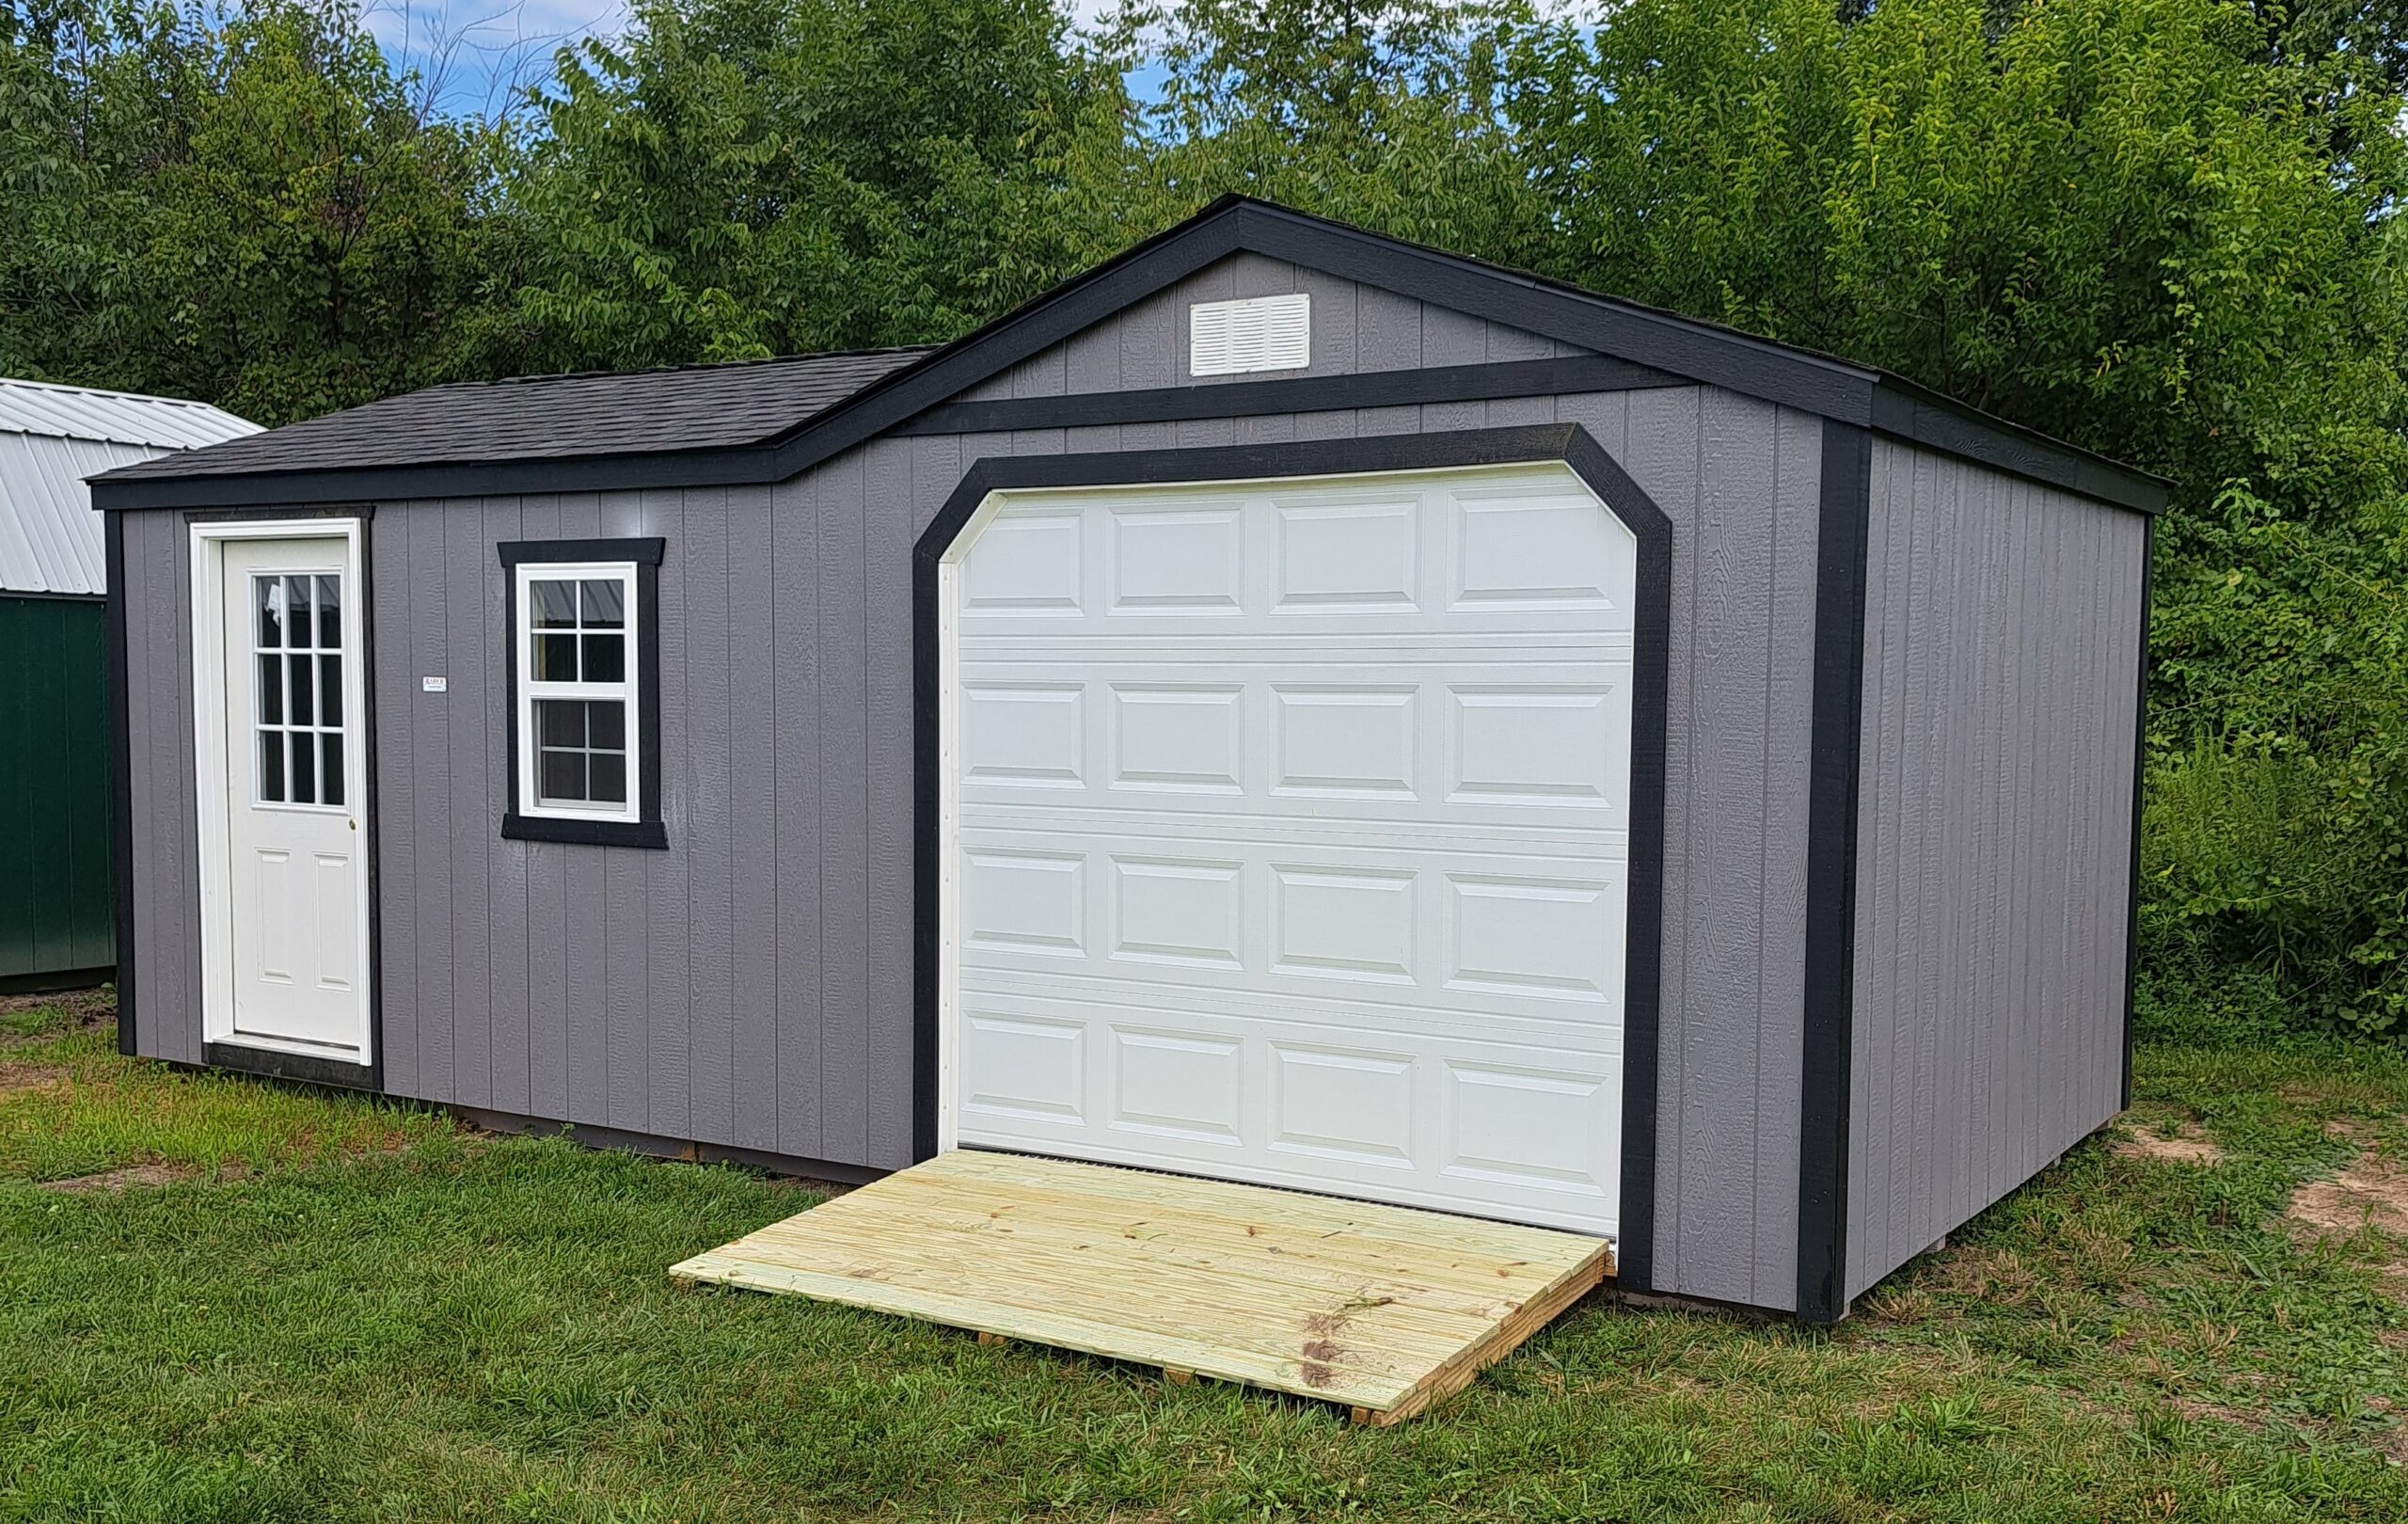 Benefits of Adding a Ramp to Your Shed